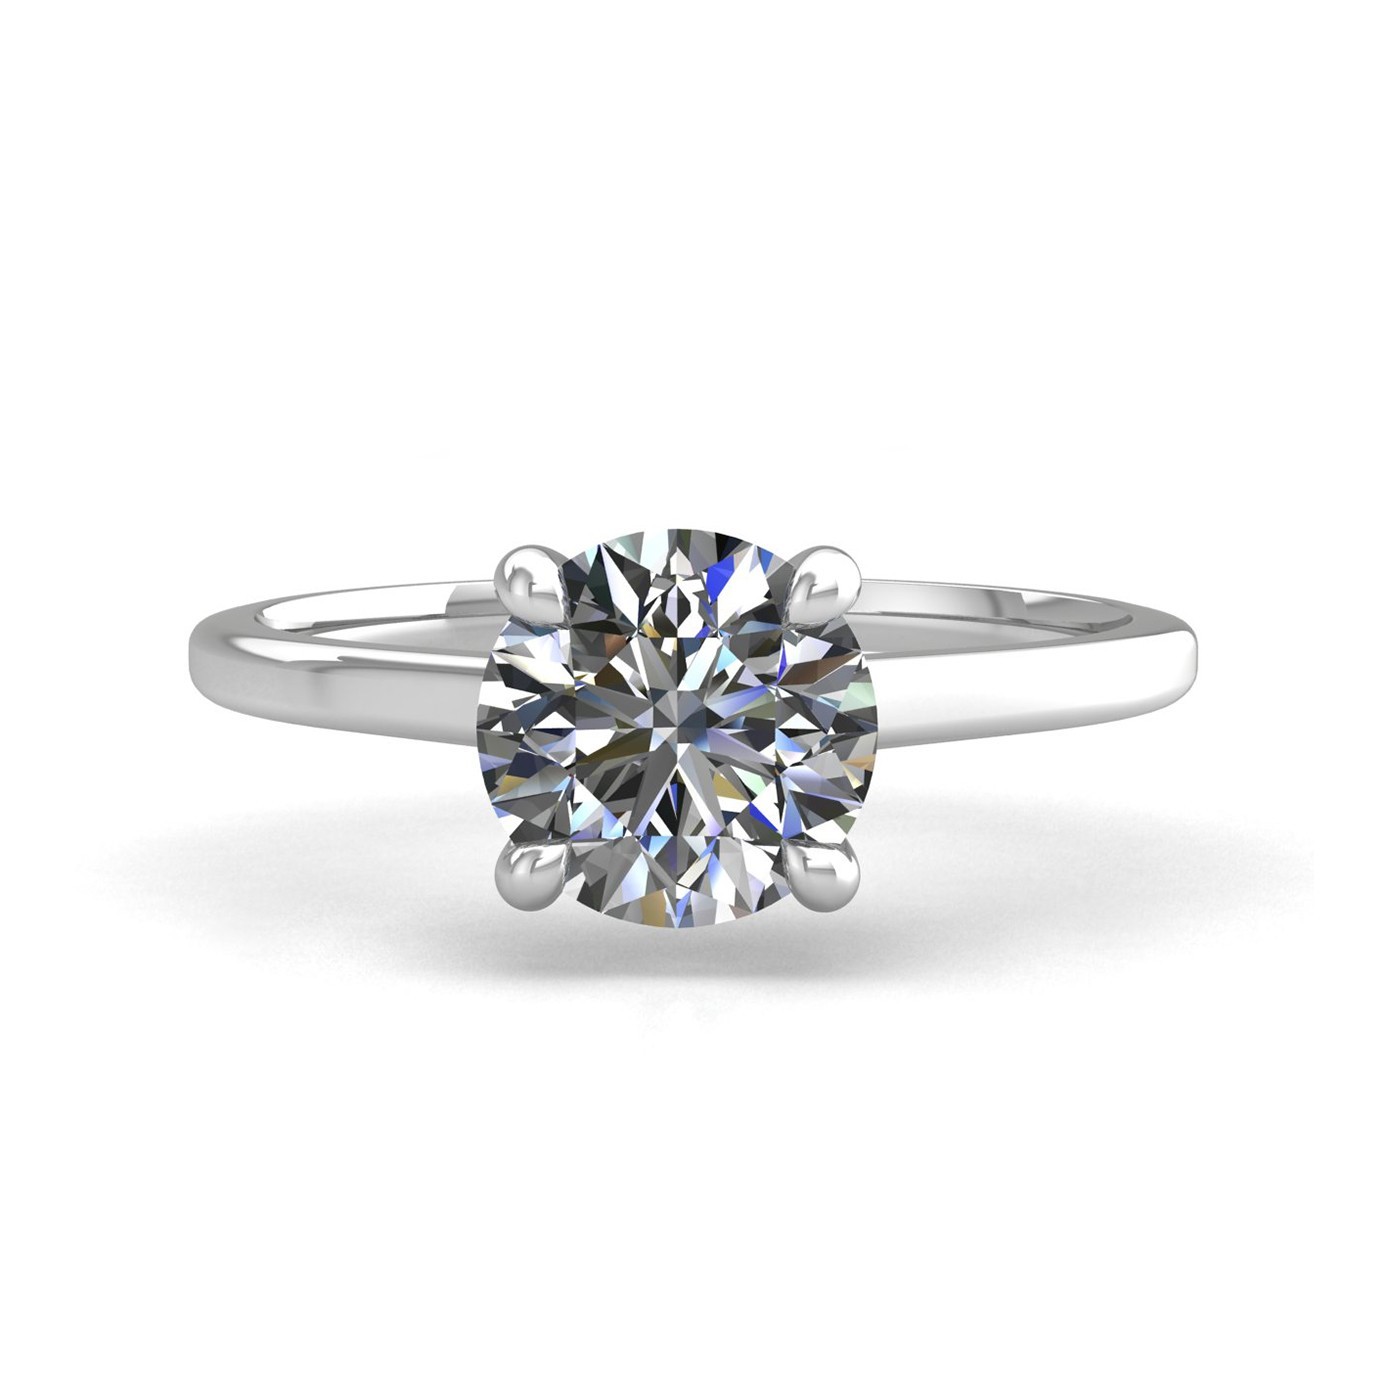 18k white gold 0,80 ct 4 prongs solitaire round cut diamond engagement ring with whisper thin band Photos & images